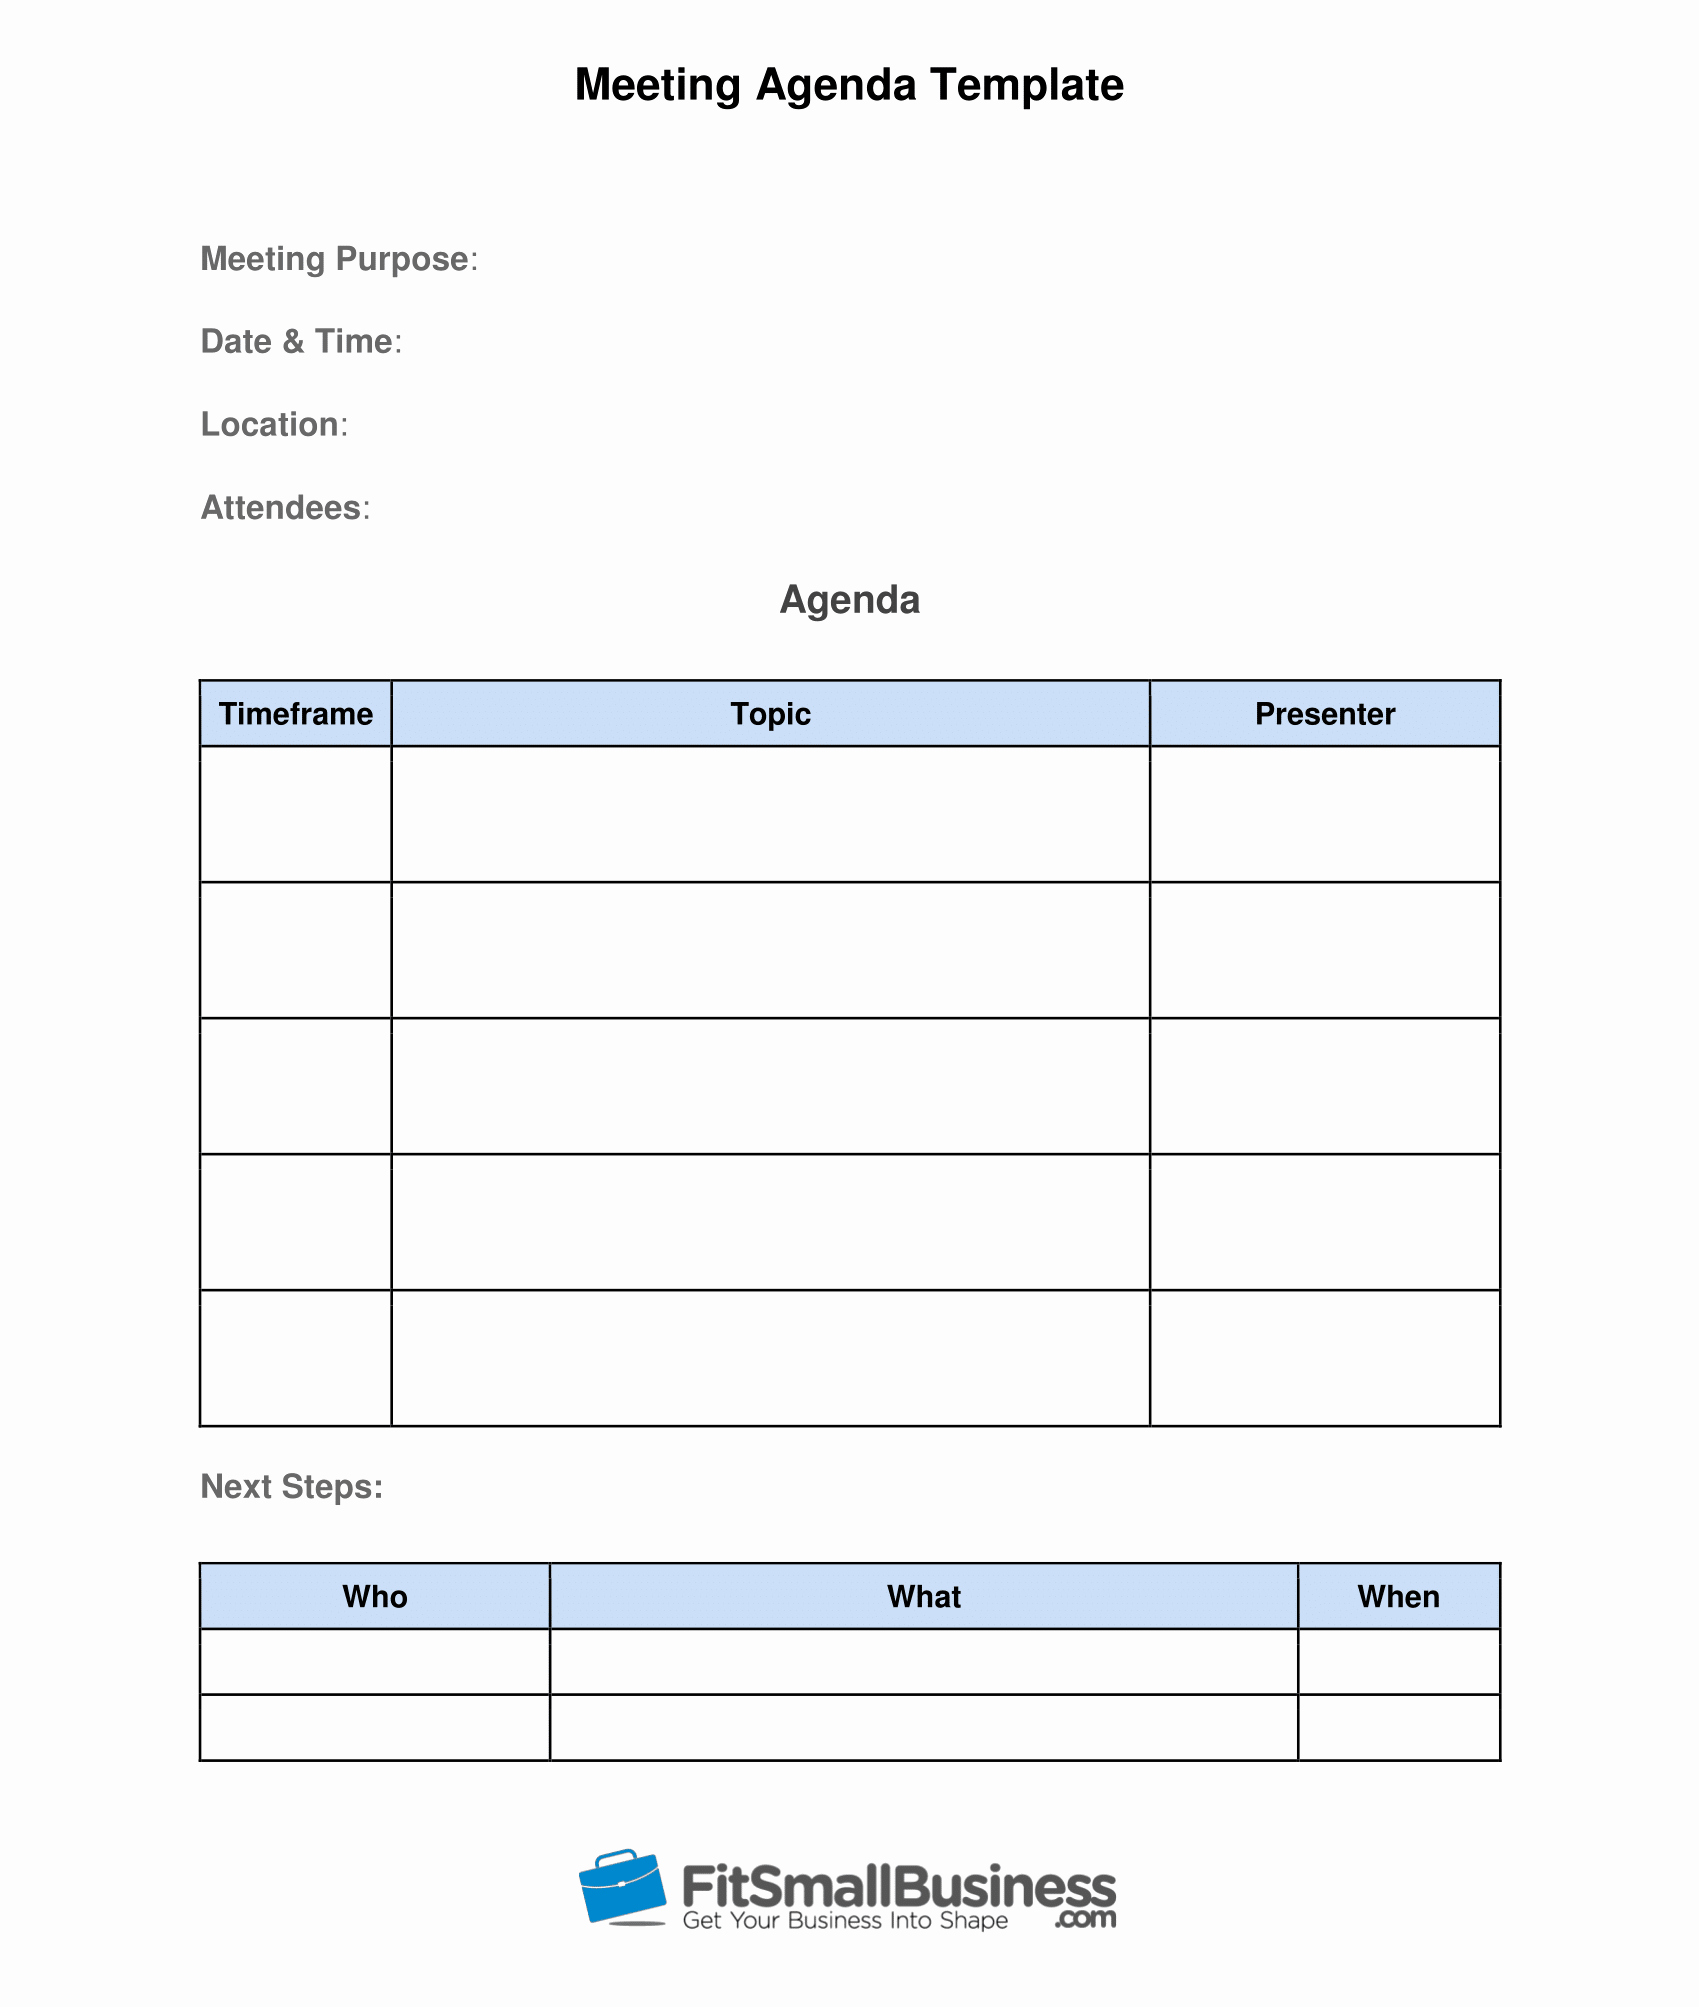 Meeting Notes Template Free Awesome How to Run Effective Meetings In 10 Steps [ Free Template]